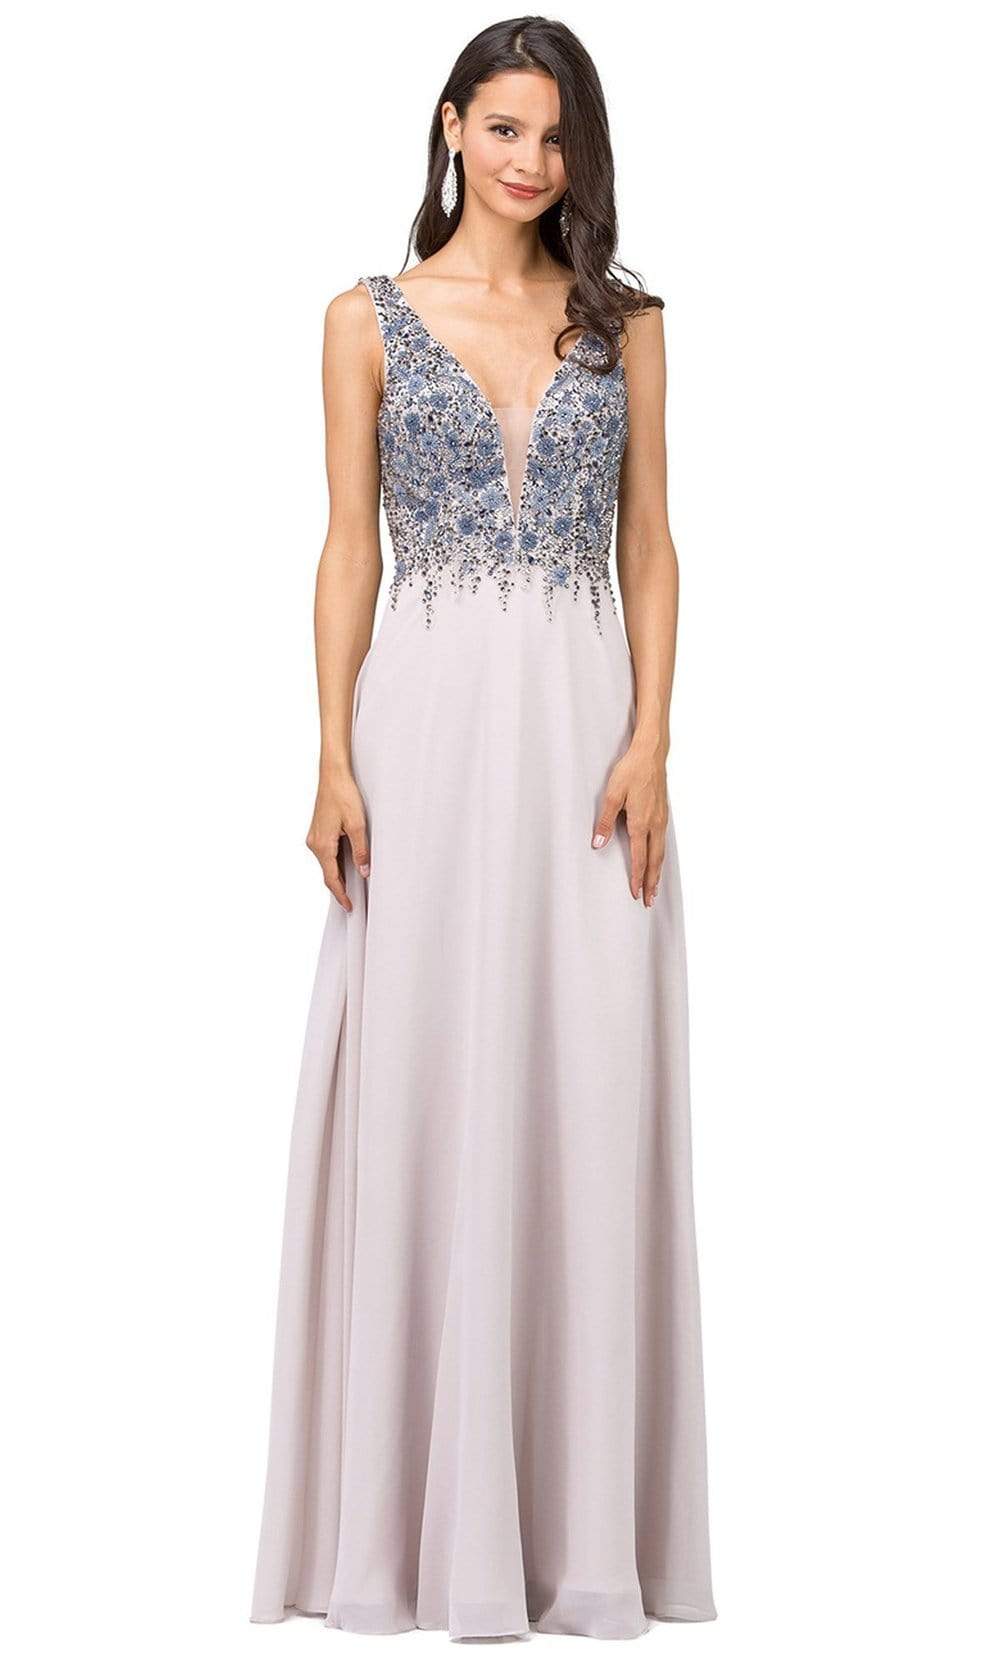 Dancing Queen - 2312 Floral Beaded Deep V-neck A-line Prom Dress Special Occasion Dress XS / Light Mocha